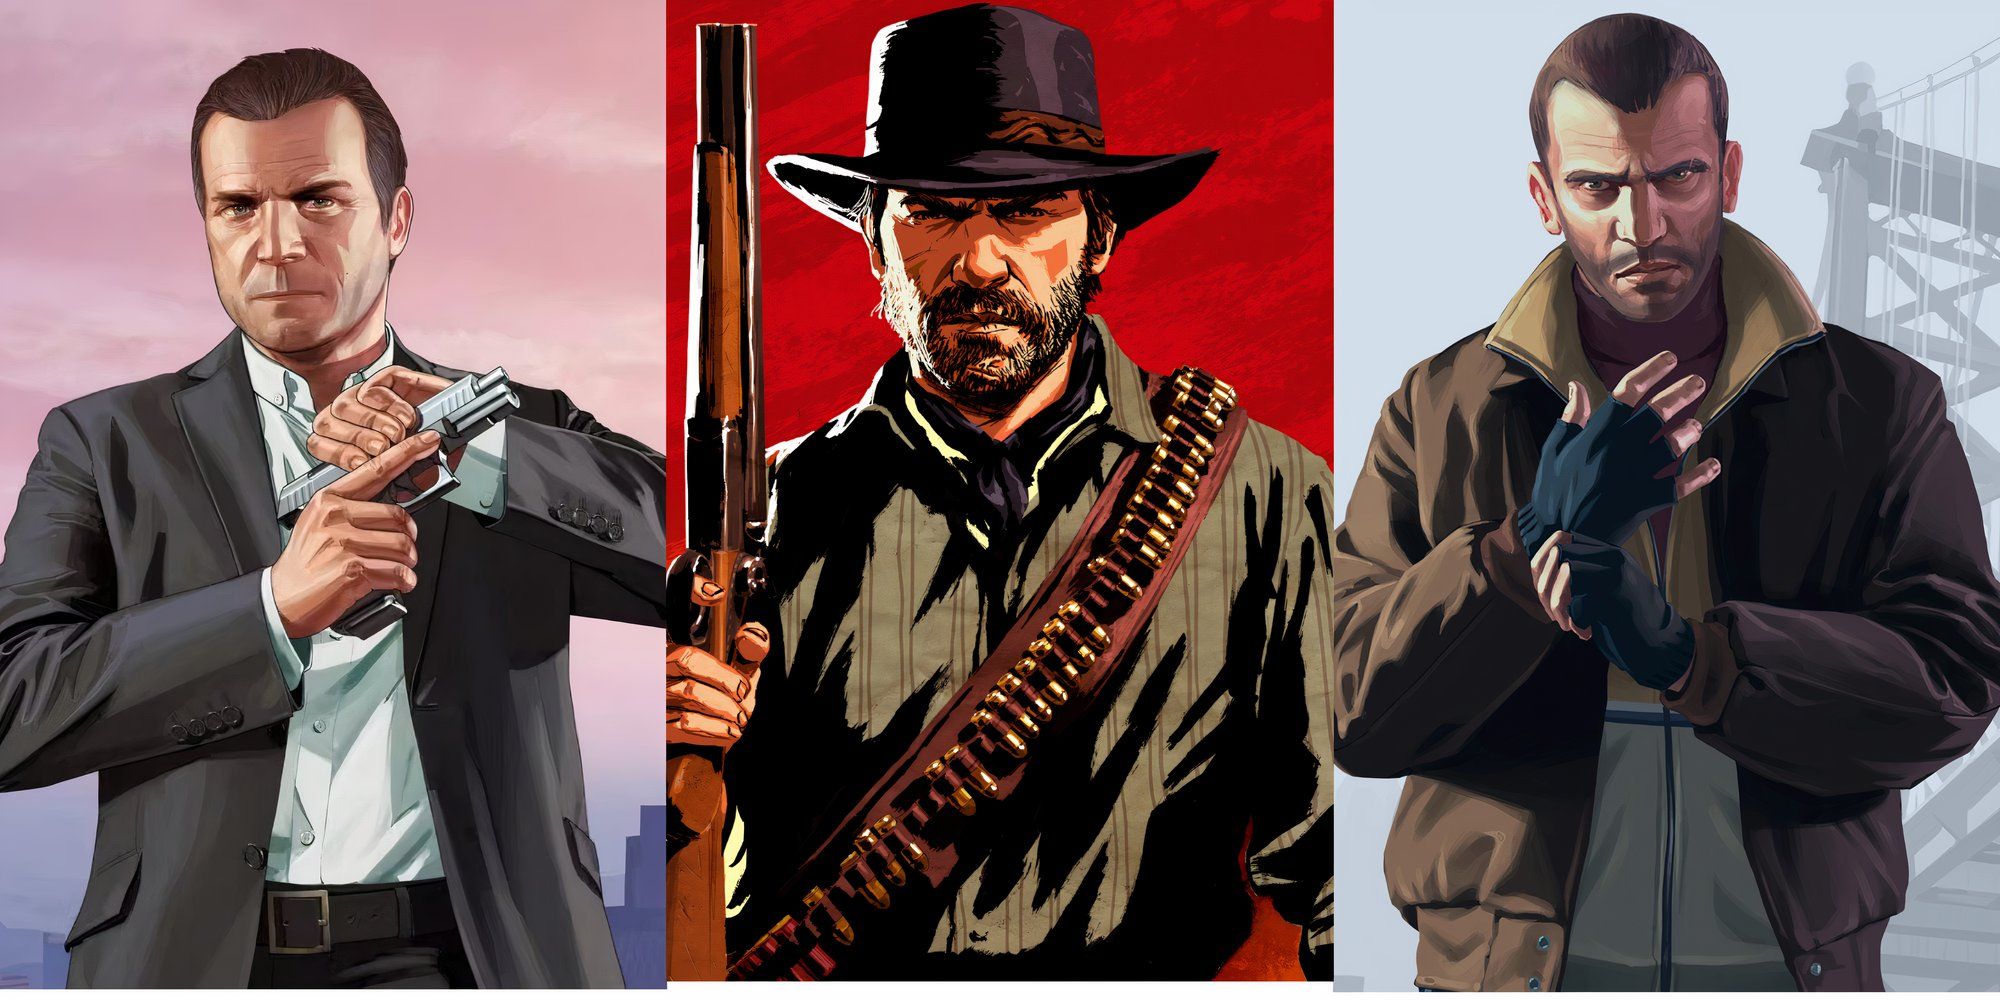 A collage featuring characters from Grand Theft Auto and Red Dead Redemption